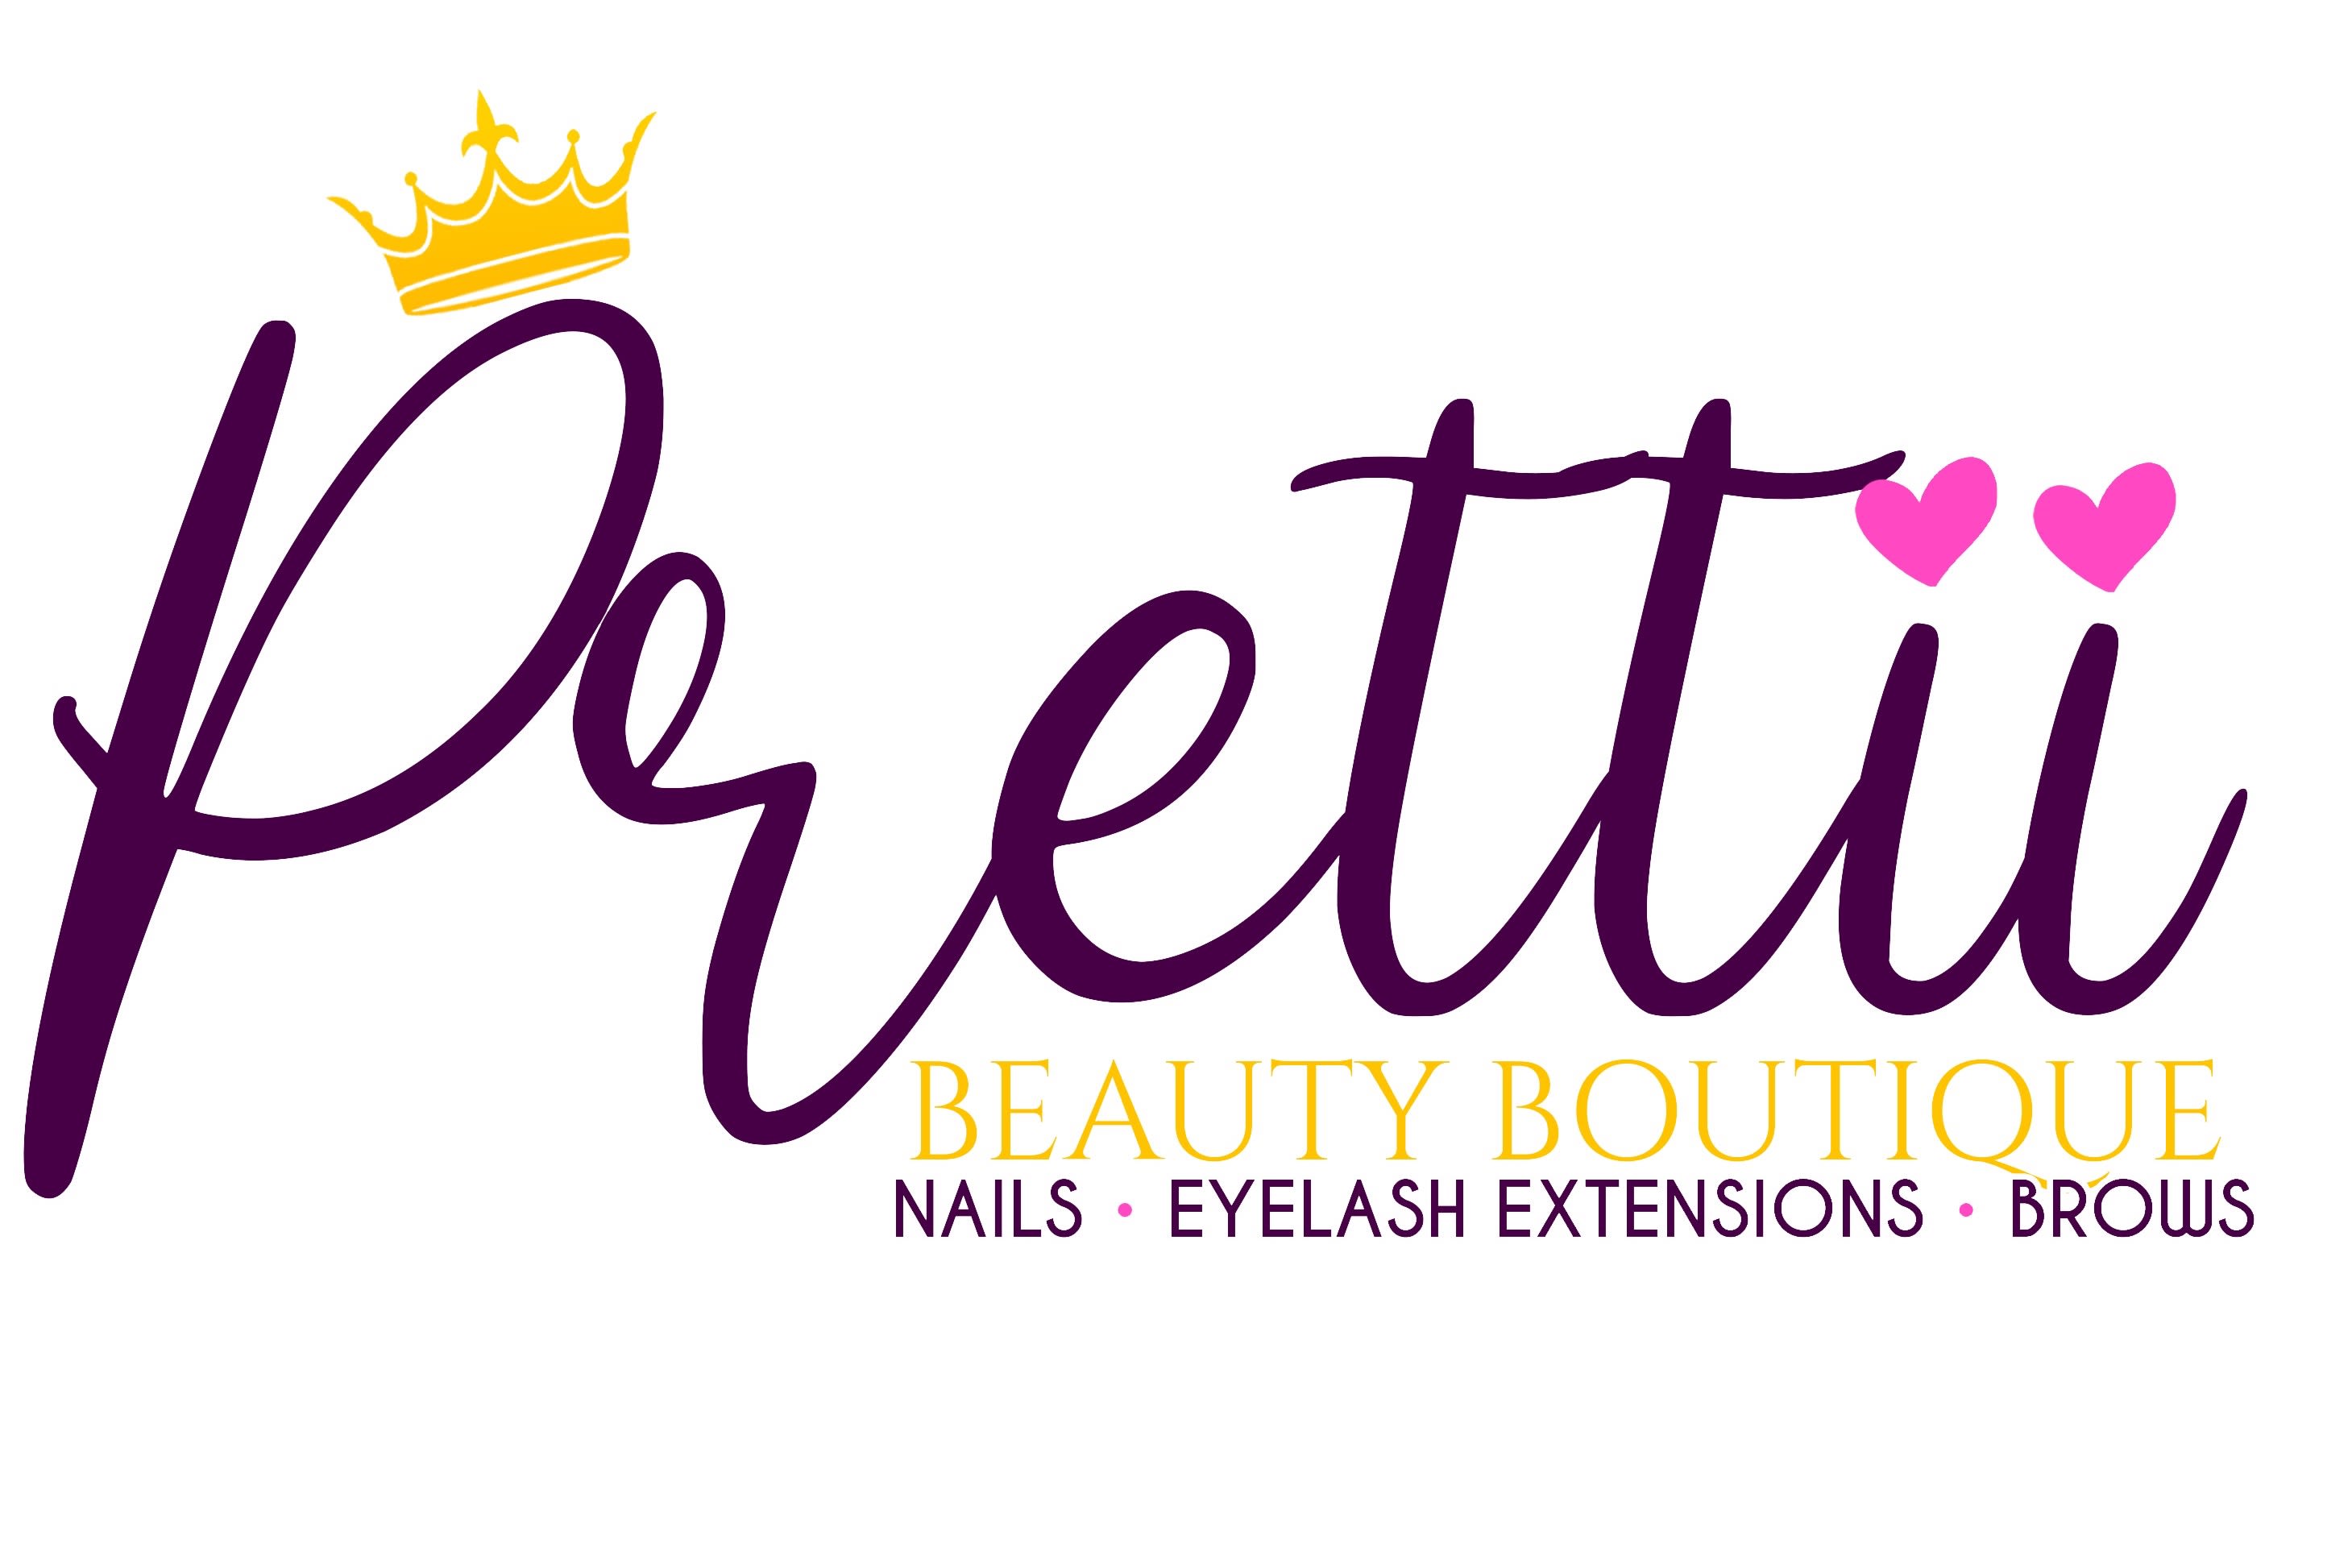 Prettii Beauty Boutique: Read Reviews and Book Classes on ClassPass